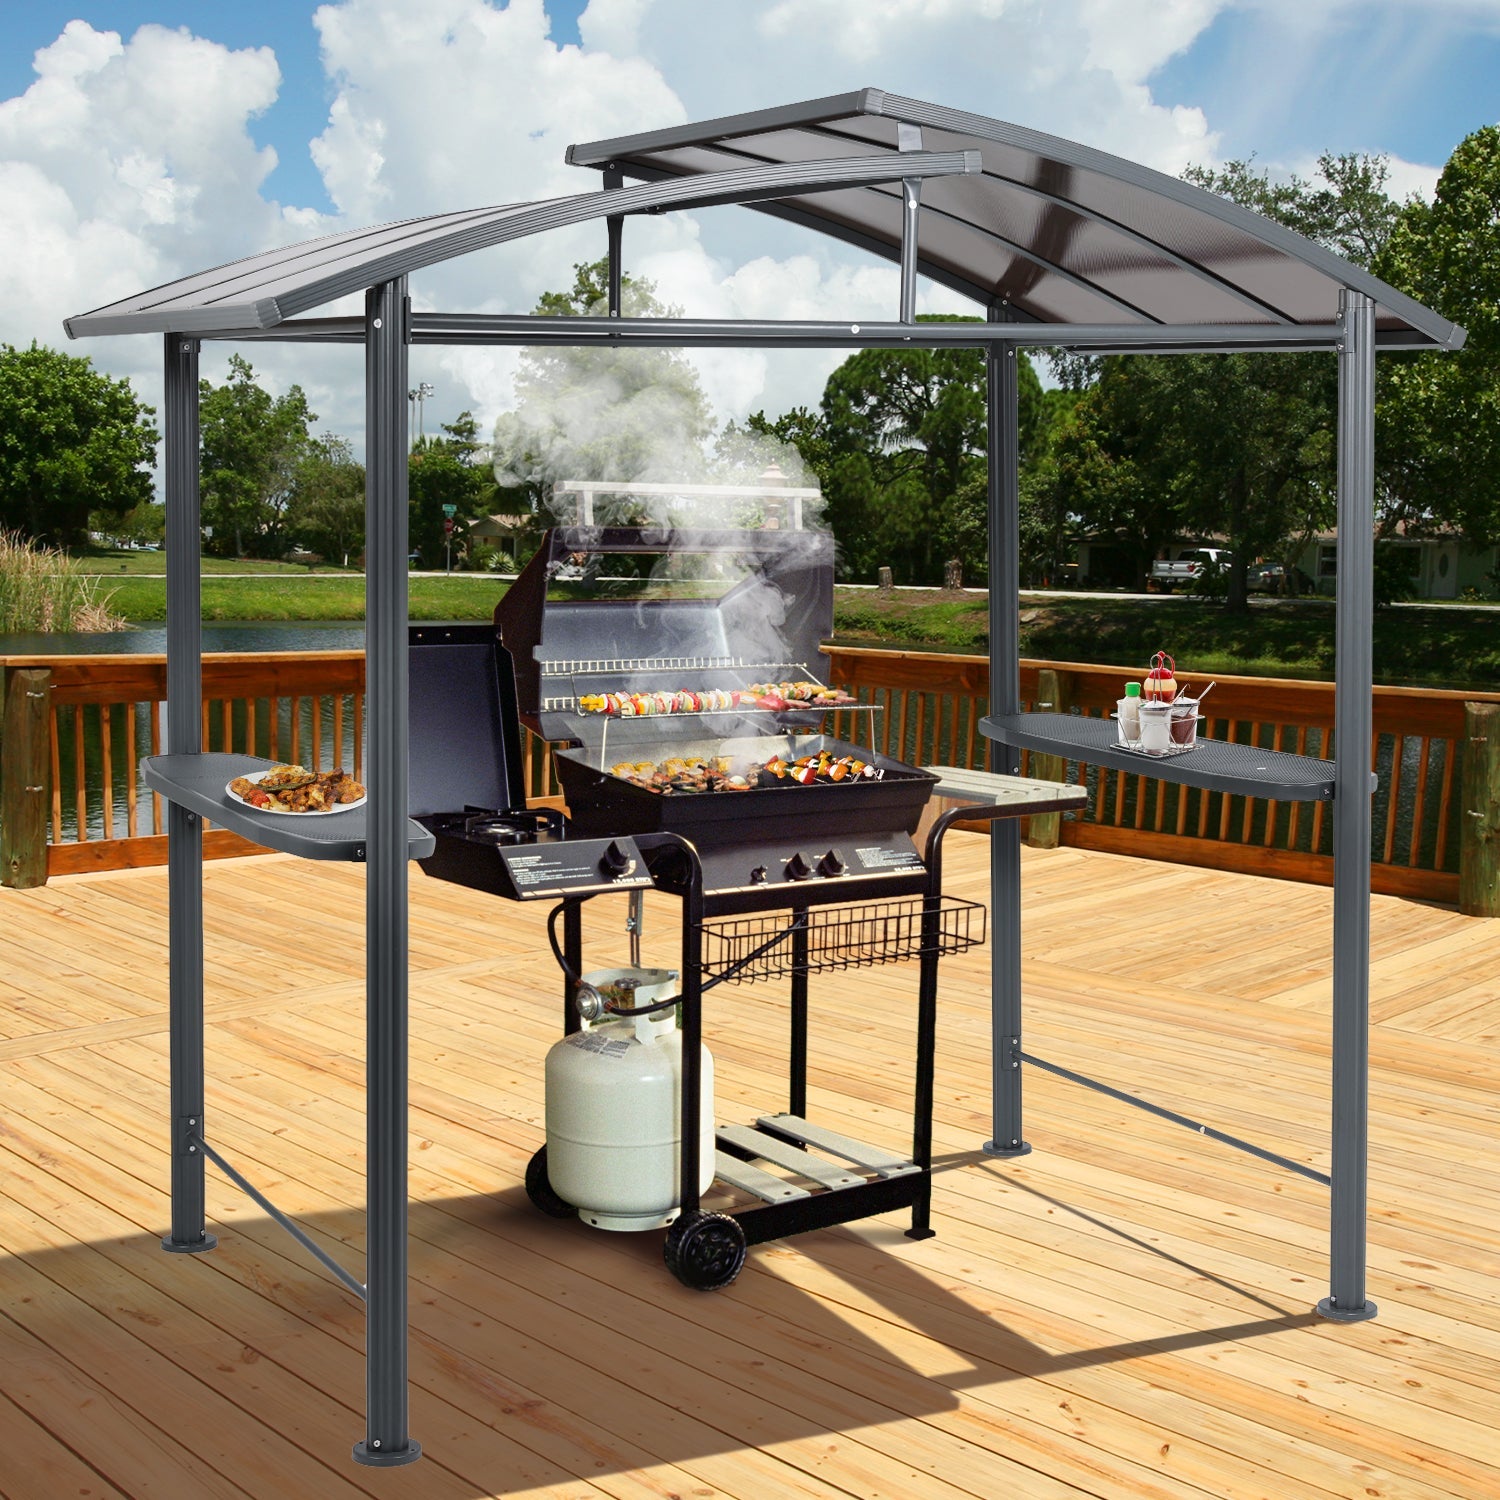 8 x 5 ft. BBQ Grill Gazebo Shelter, Dark Gray Steel Frame and Brown Double-Tier Polycarbonate Top Canopy, with Side Shelves,  for Outdoor, Patio, Backyard - Aoodor LLC